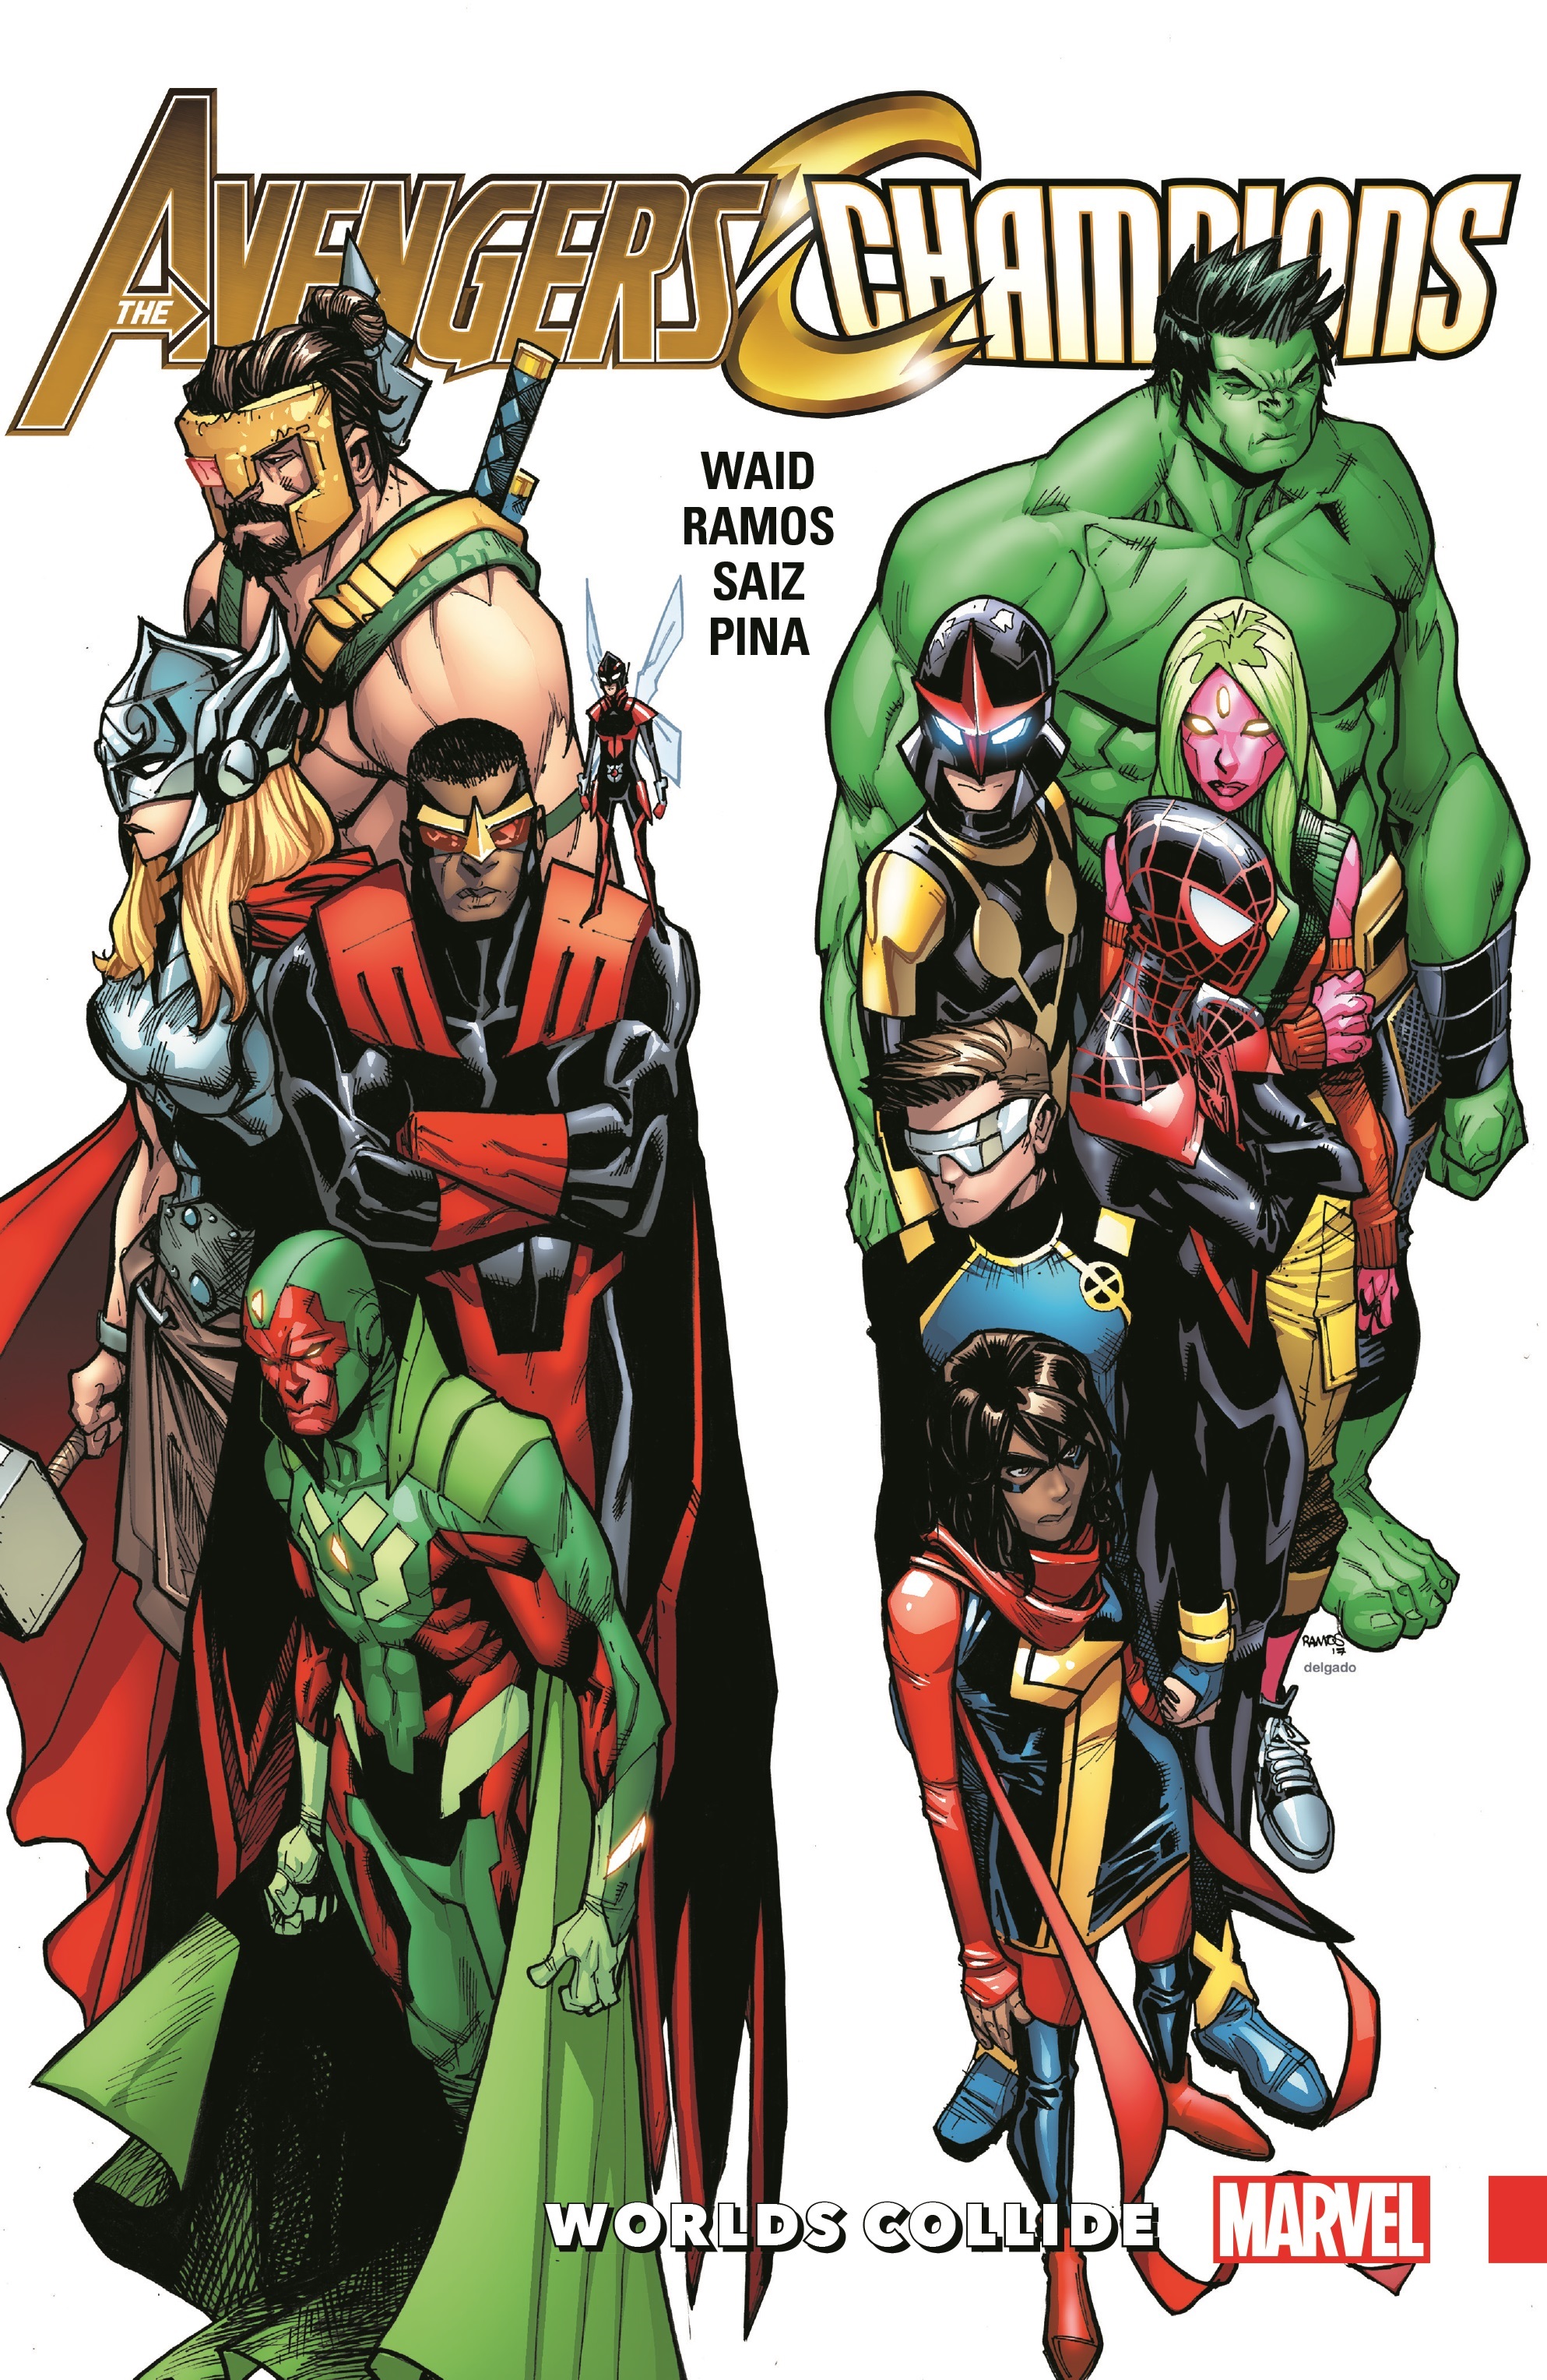 Avengers & Champions: Worlds Collide (Trade Paperback)